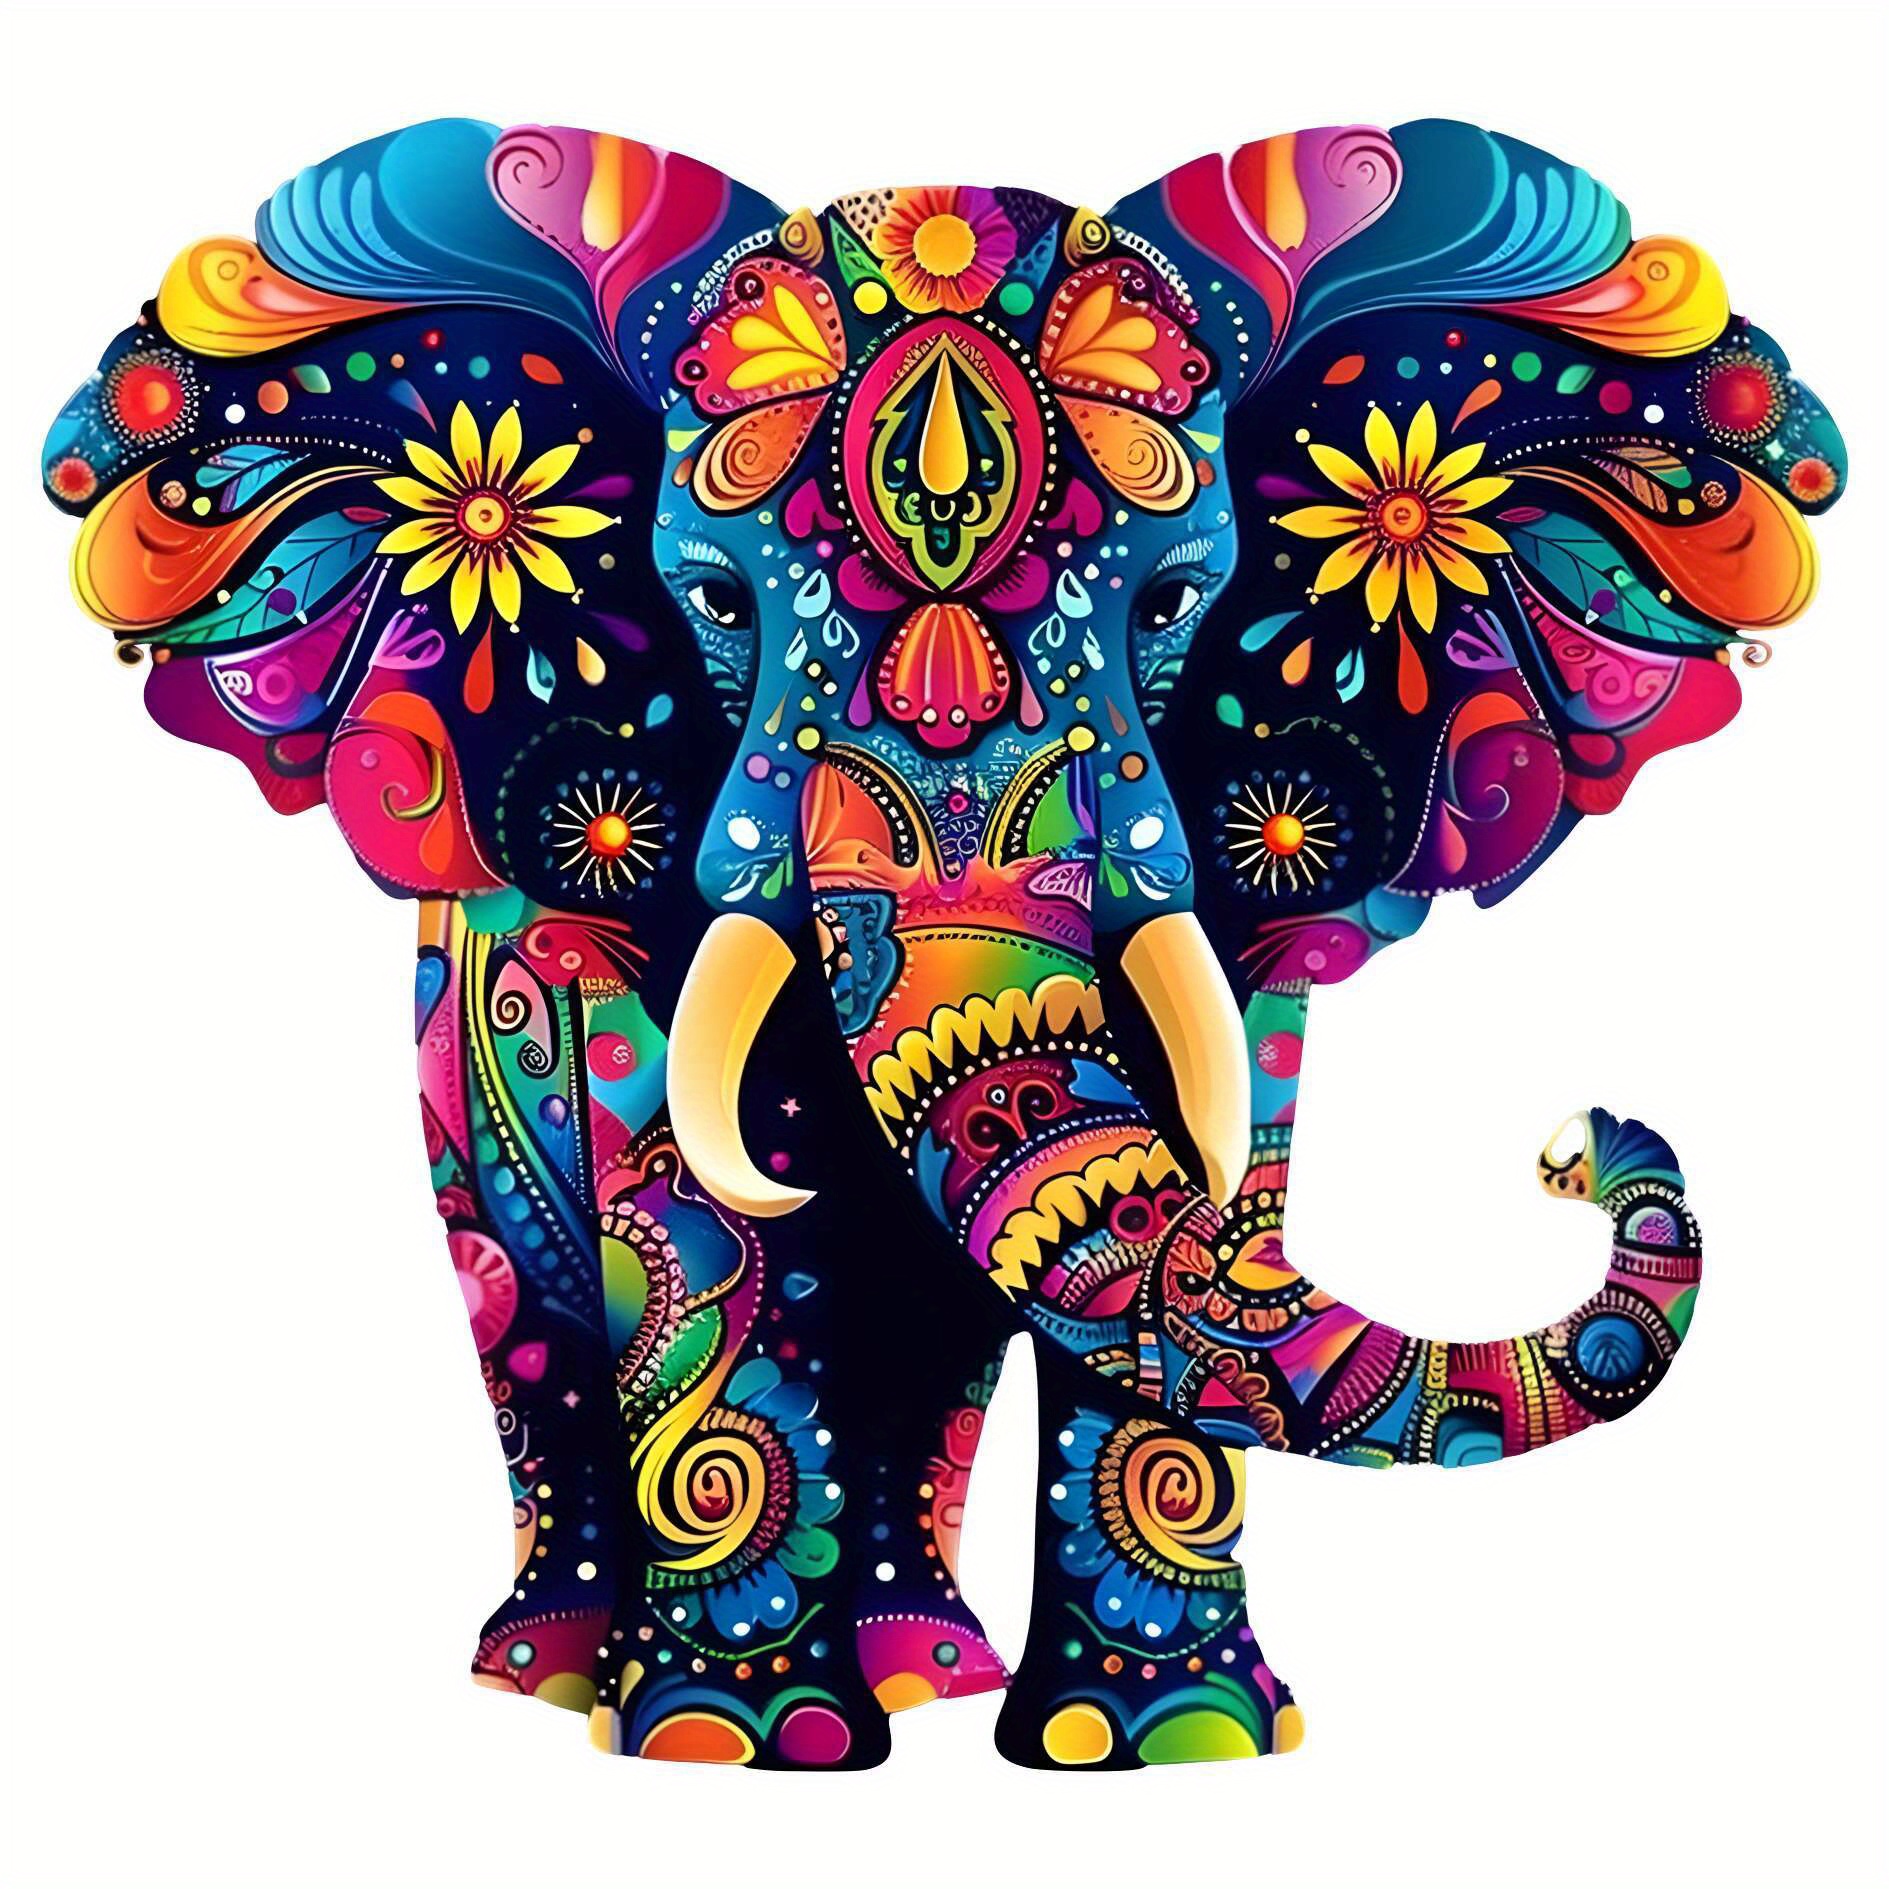 

Bright And Lively Elephants Fashion Heat Transfer Vinyl Patch, Washable Iron On Patch For T-shirts, Jeans, Jackets, Backpacks, Clothes, Hats And So On